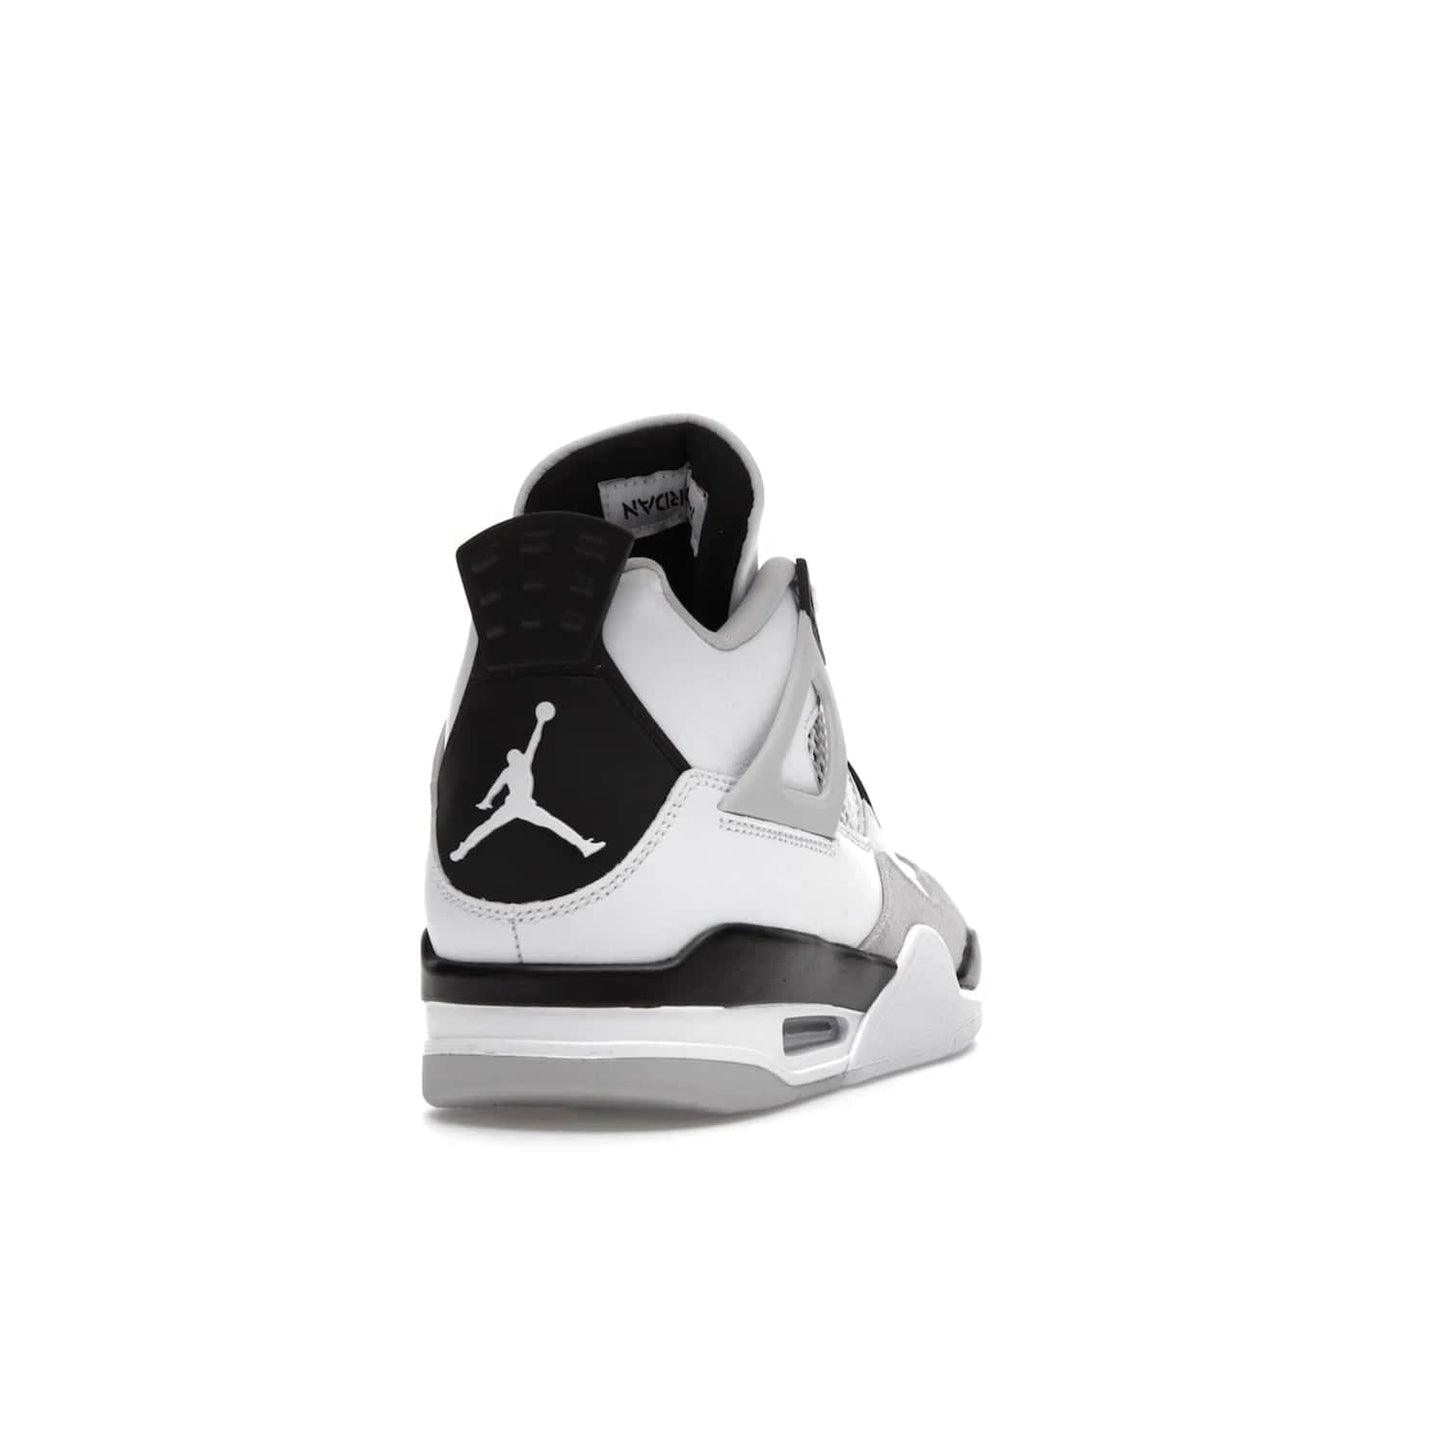 Jordan 4 Retro Military Black - Image 30 - Only at www.BallersClubKickz.com - Updated Air Jordan 4 style with a white/black/light grey sole and visible Air unit. Released in May 2022, offering timeless classic style and comfort.